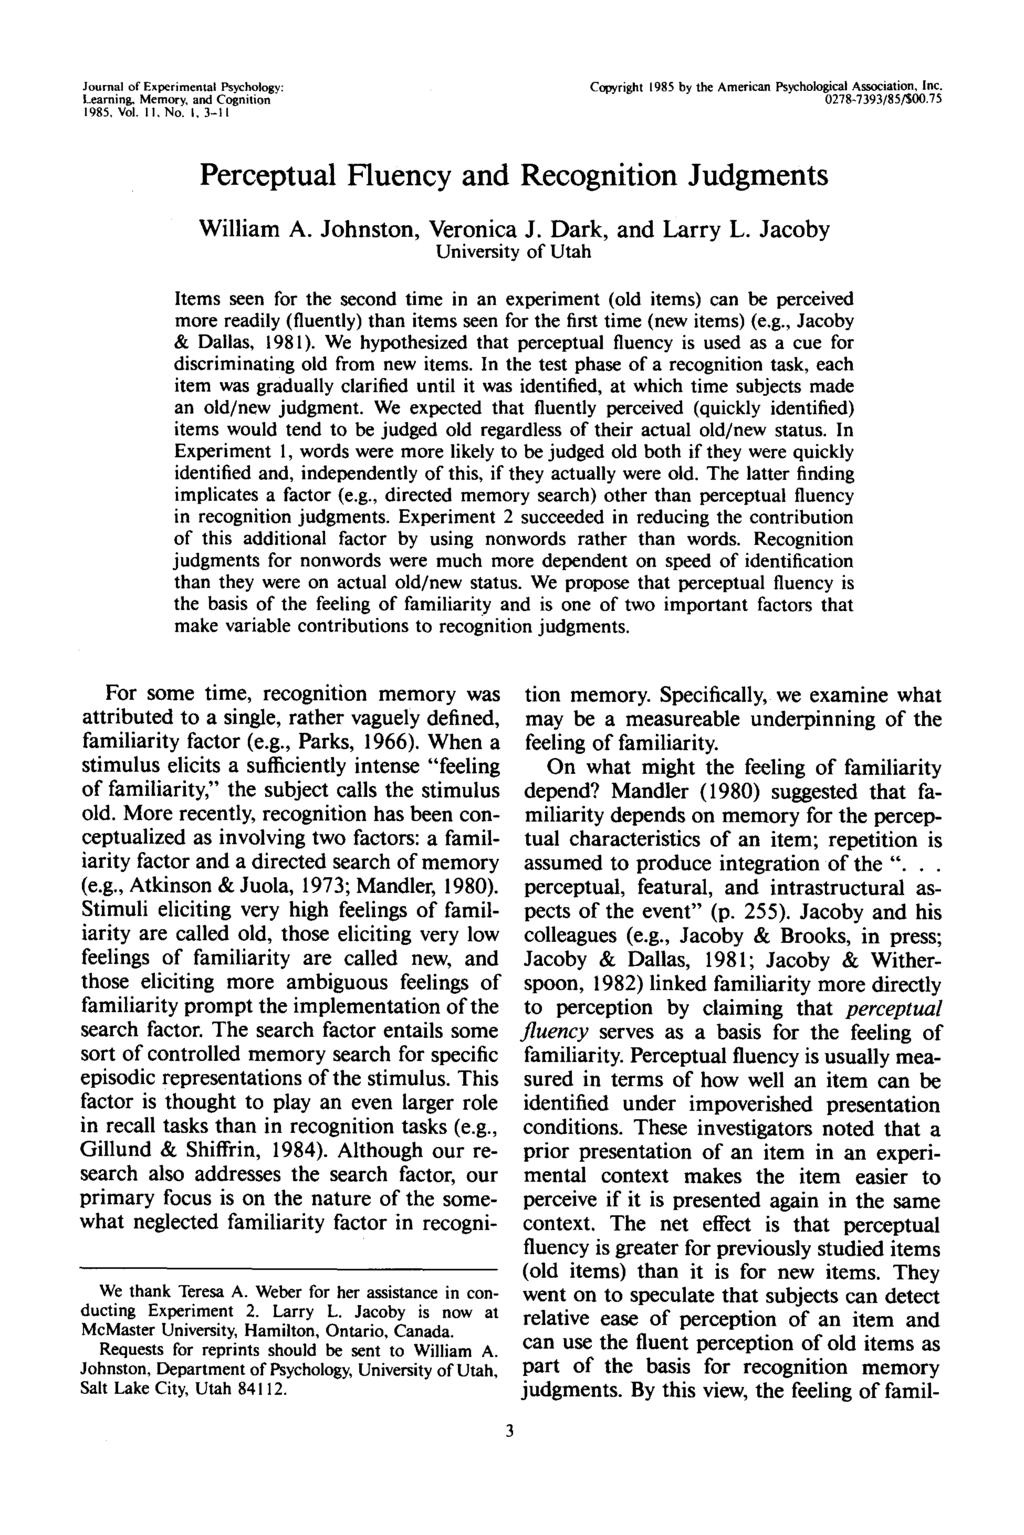 Journal of Experimental Psychology: Learning, emory, and Cognition 1985, Vol. 11, No. I, 3-11 Copyright 1985 by the American Psychological Association, Inc. O278-7393/85/SOO.